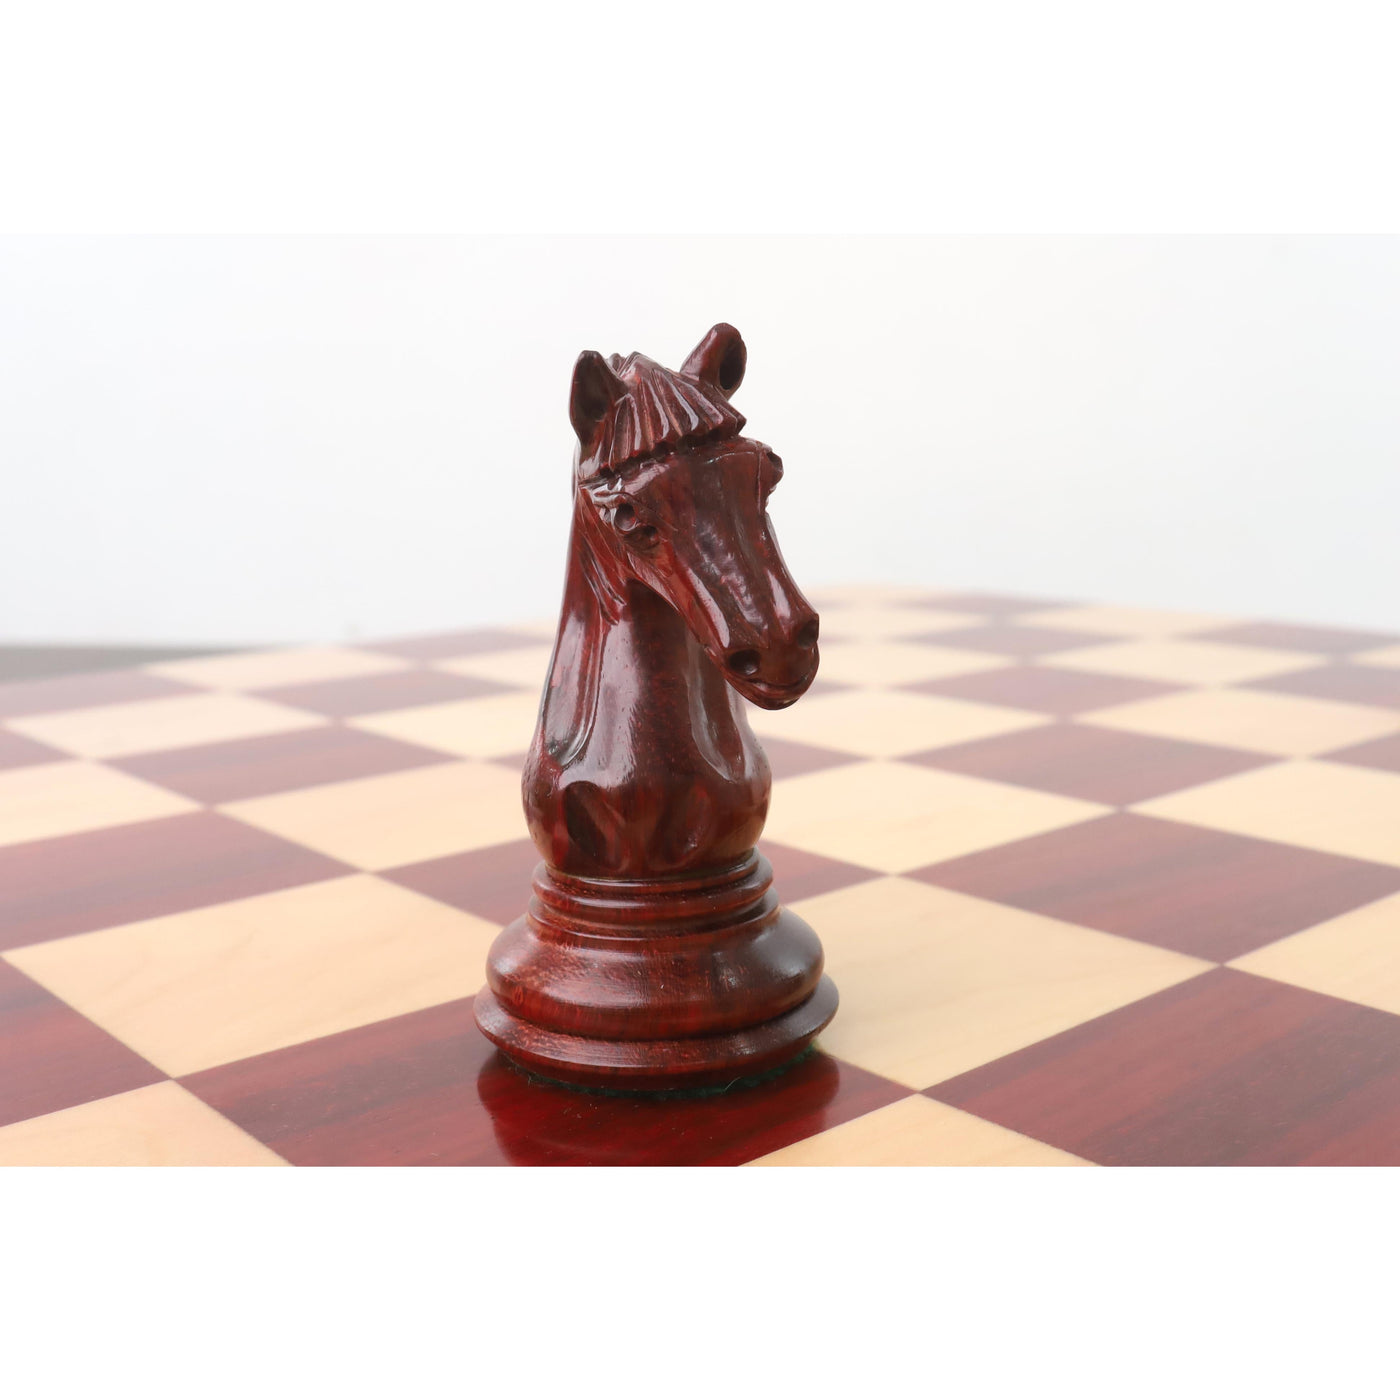 Slightly Imperfect Tilted Knight Luxury Staunton Chess Set - Chess Pieces Only - Bud Rosewood & Boxwood